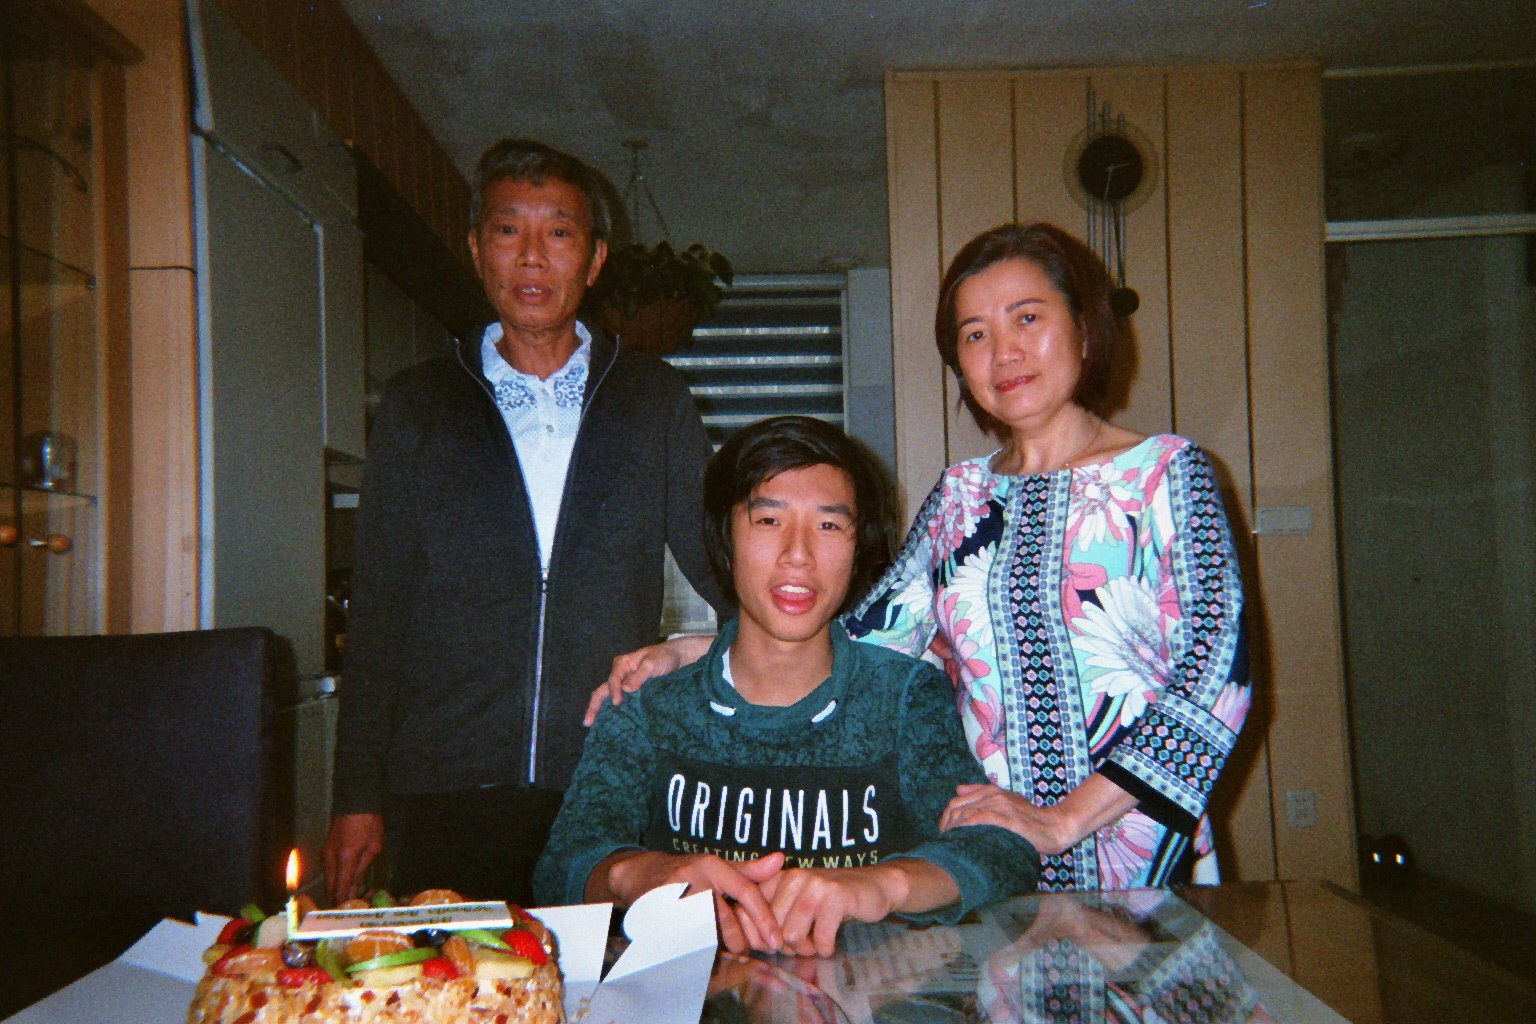 Trams father, brother and mother with a cake on the dining table.